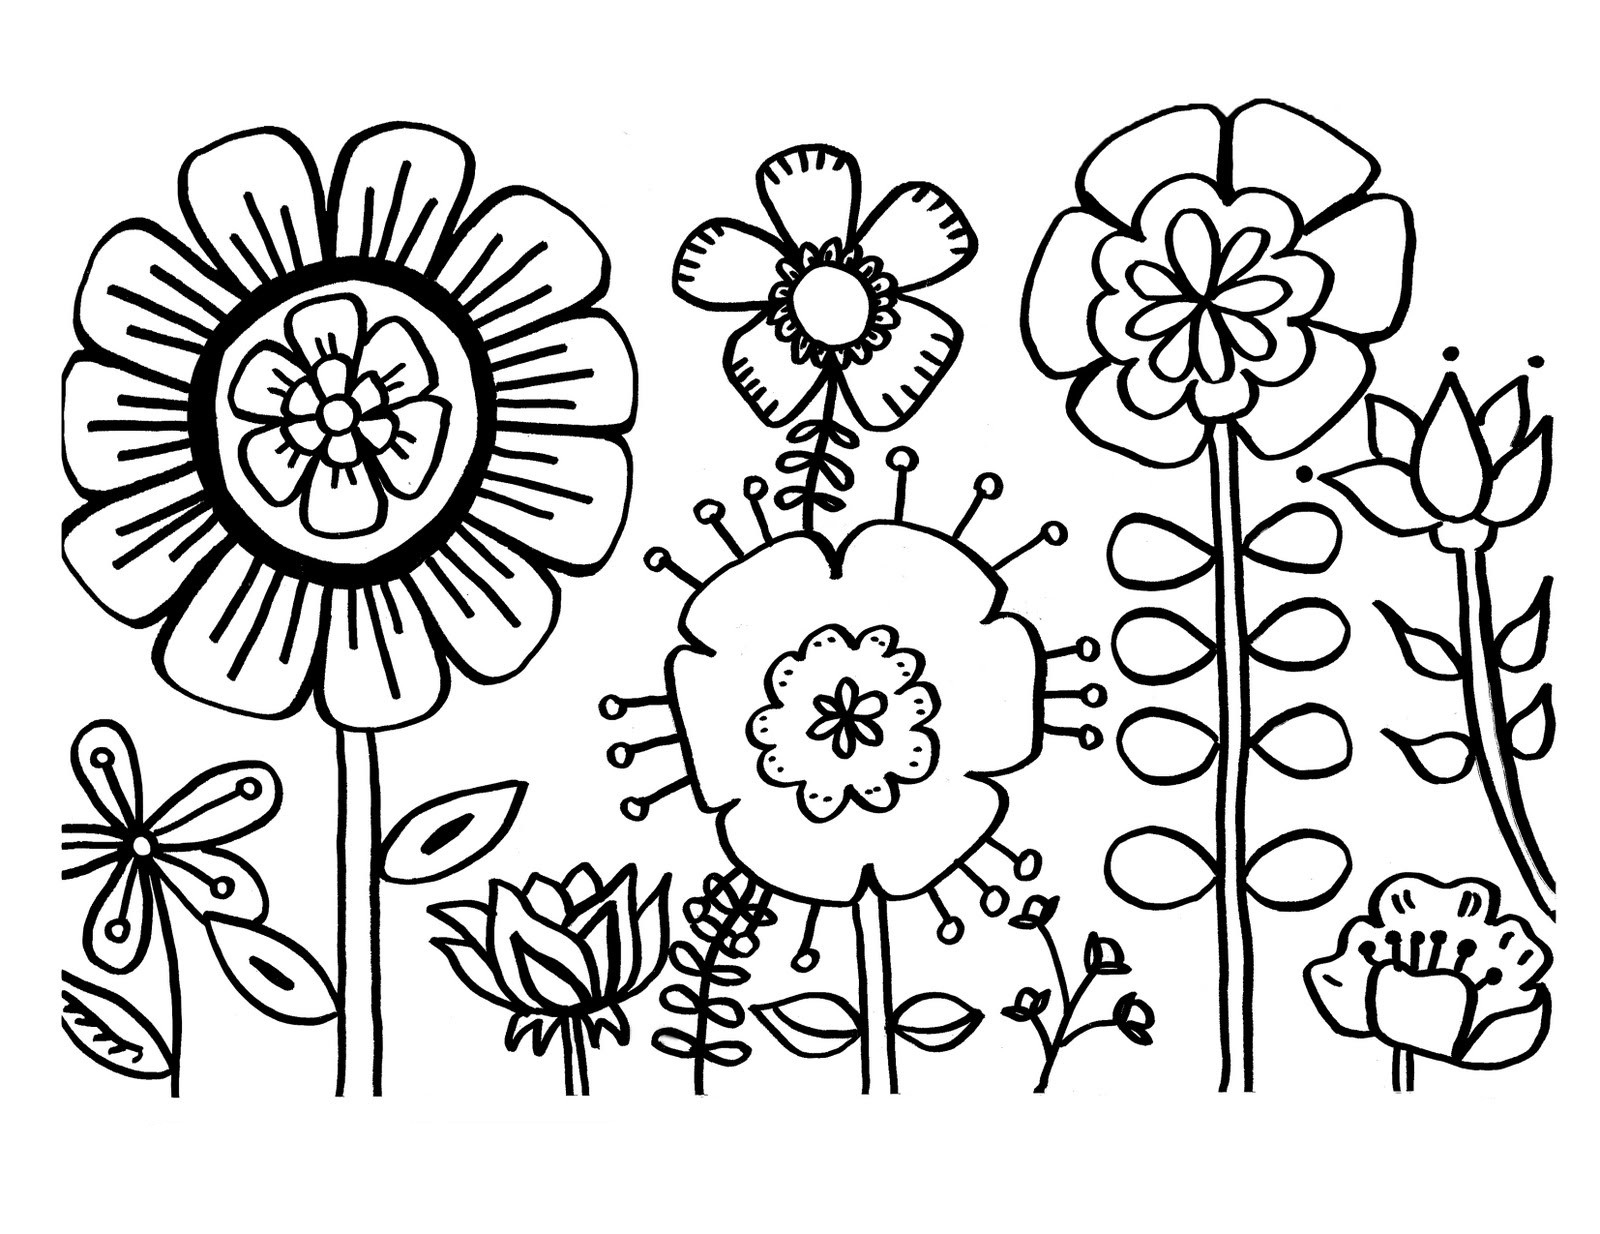 Zinnia Flower Doodles Coloring Page